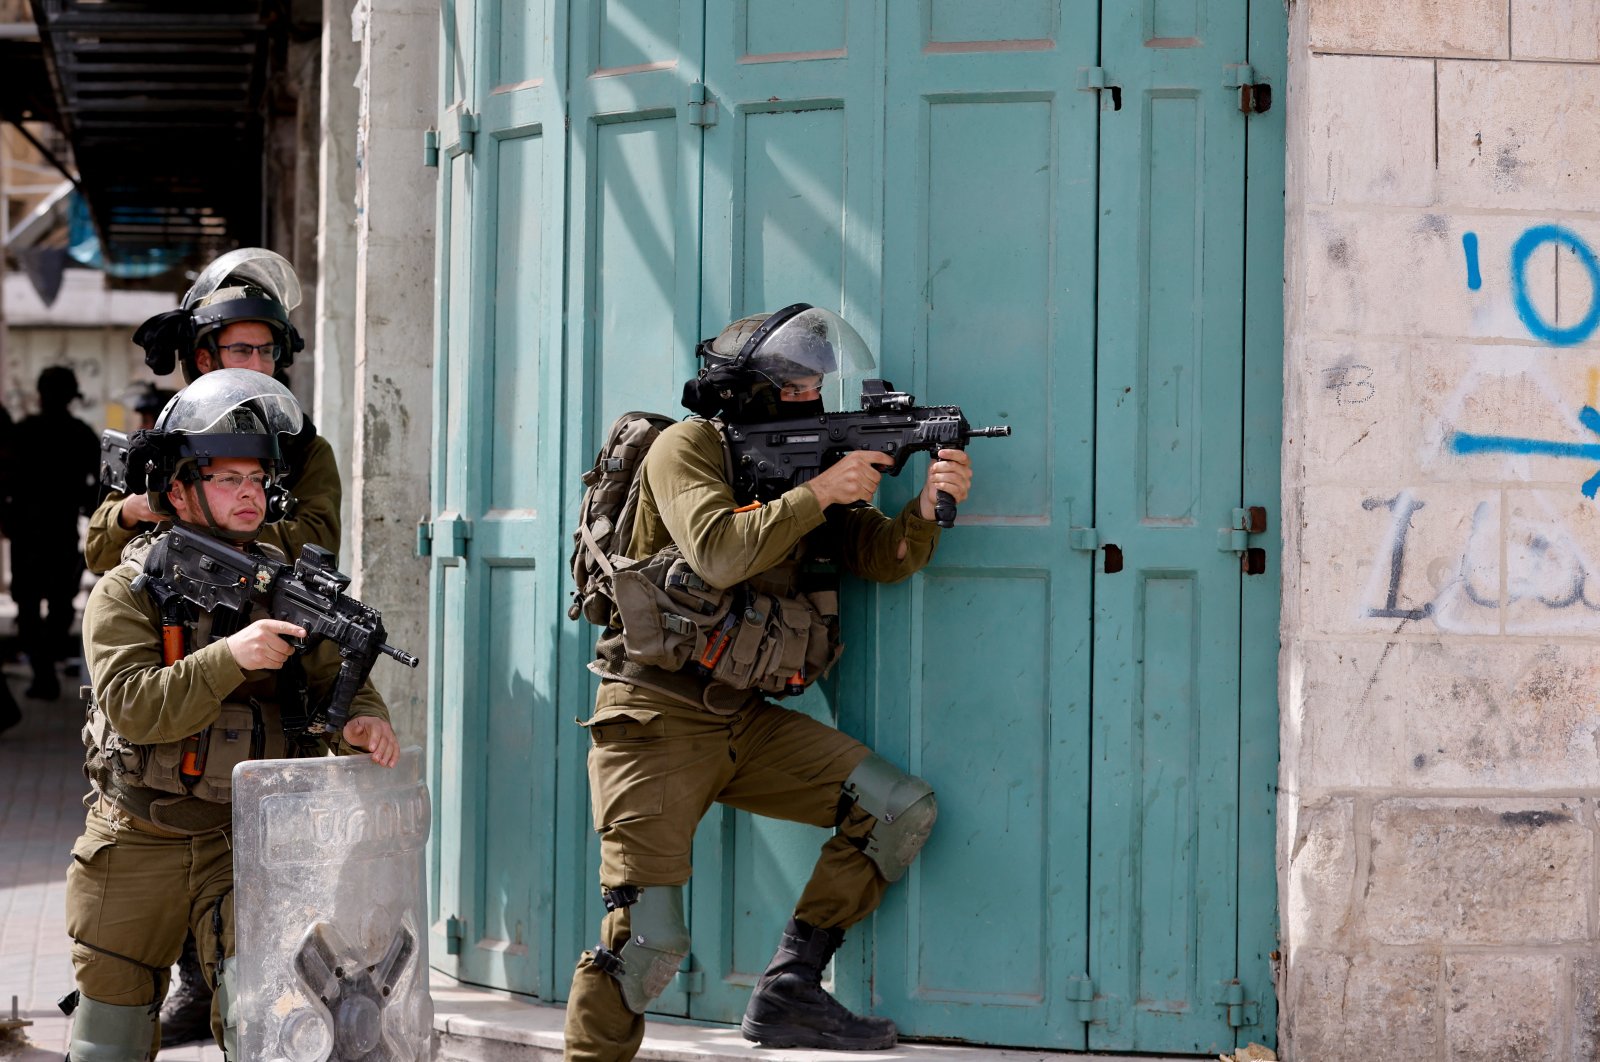 An Israeli soldier takes aim at Palestinian protesters in Hebron, in the Israeli-occupied West Bank, Palestine, April 1, 2022. (Reuters Photo)